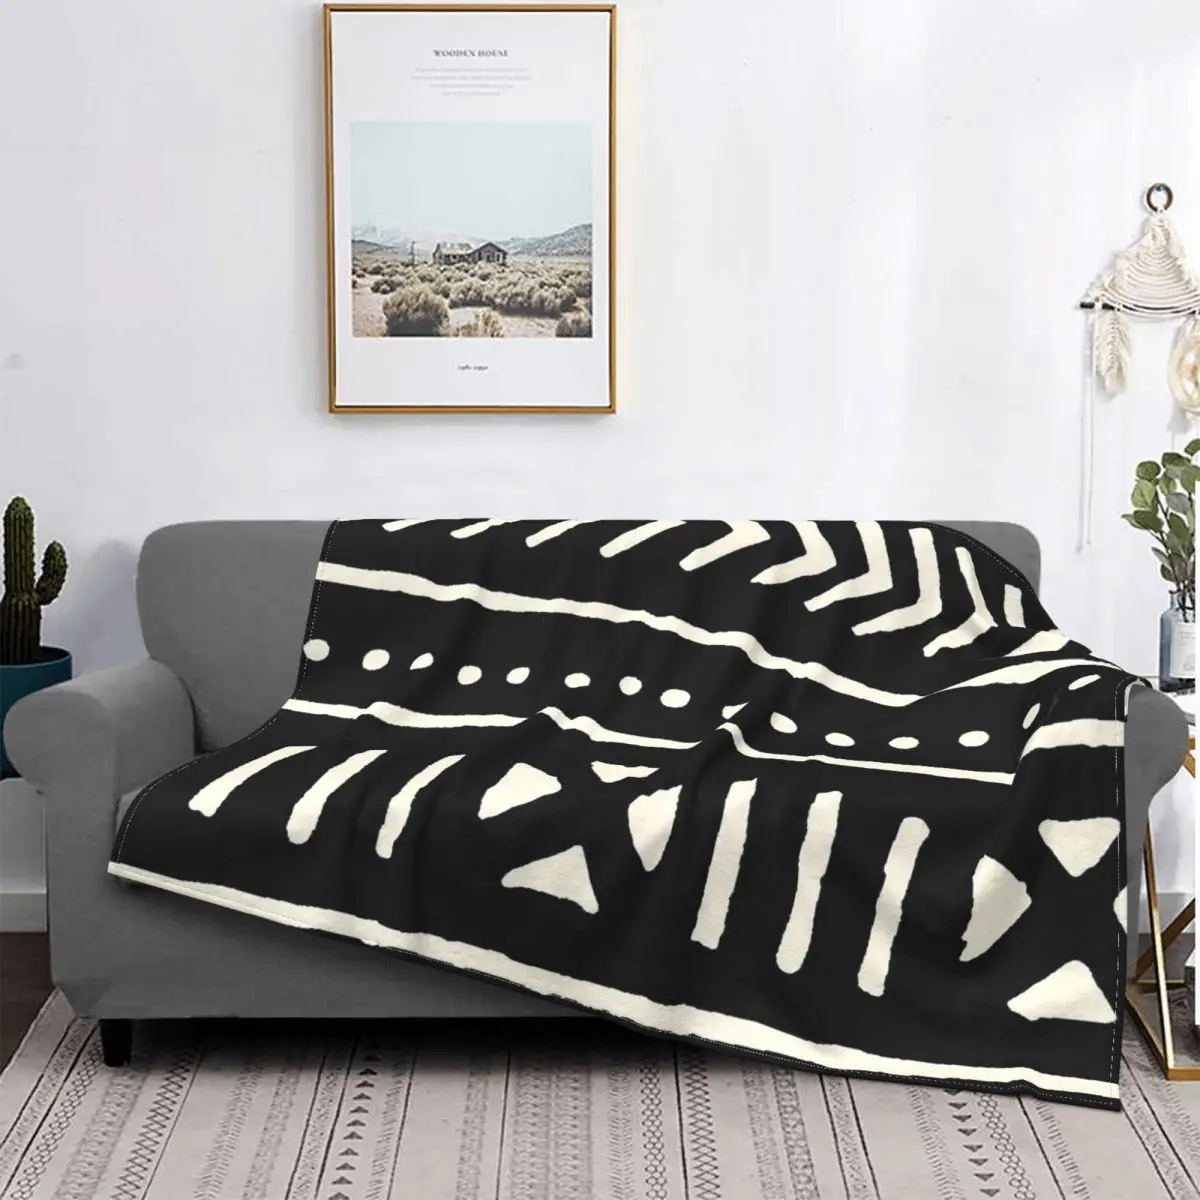 Art african mud cloth black and white portable warm throw blankets for bedding travel